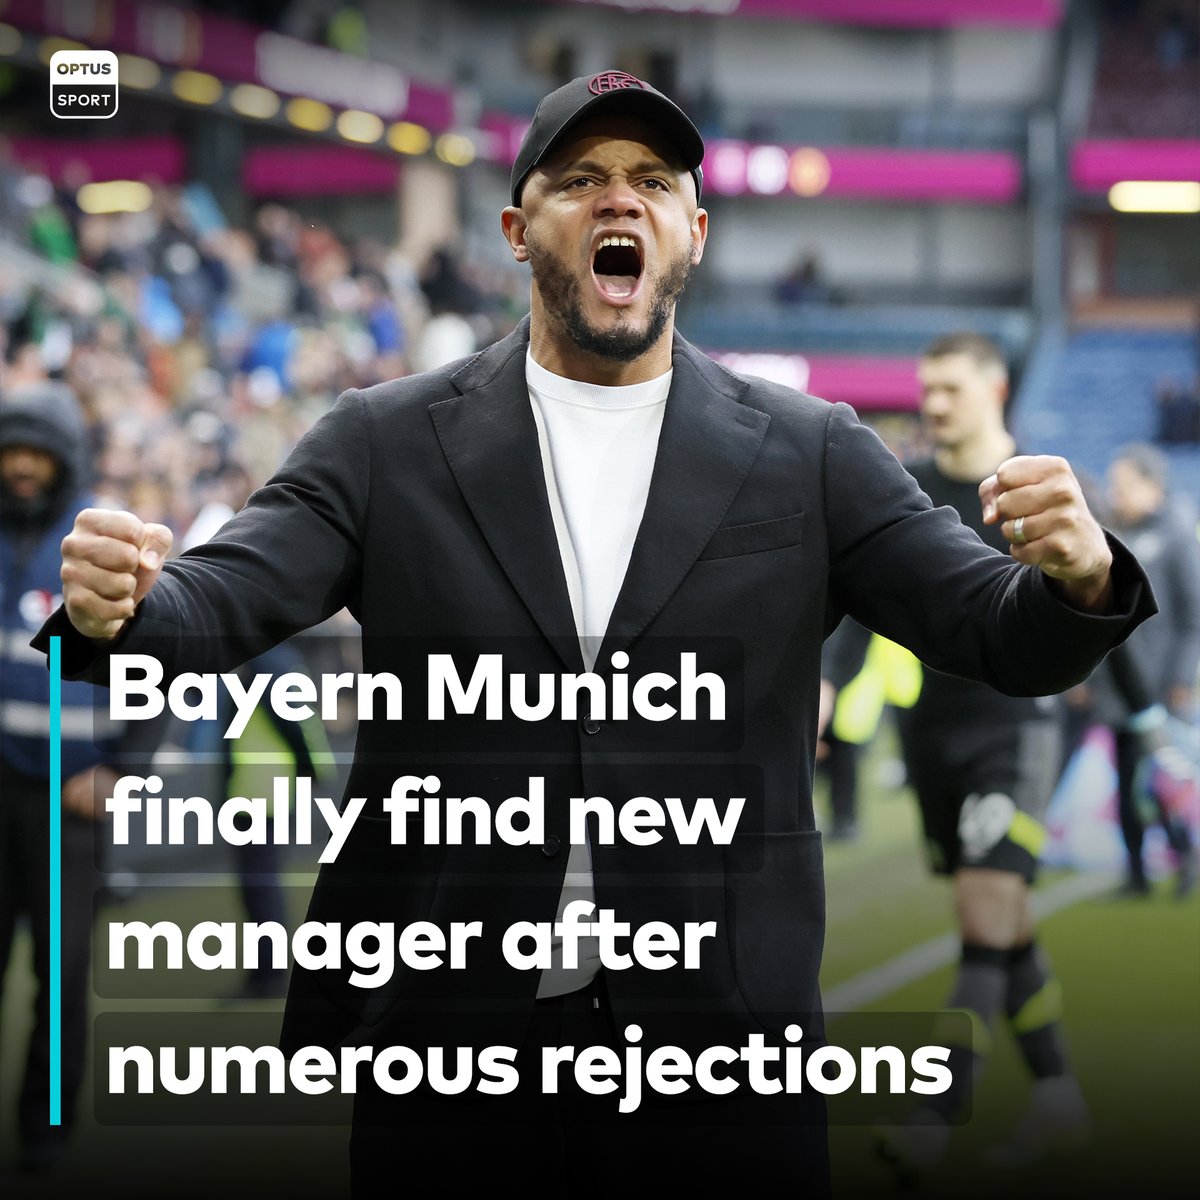 Their decision will certainly raise a few eyebrows 👀 Full story 🗞️ watchoptus.tv/BayernCloseToK…